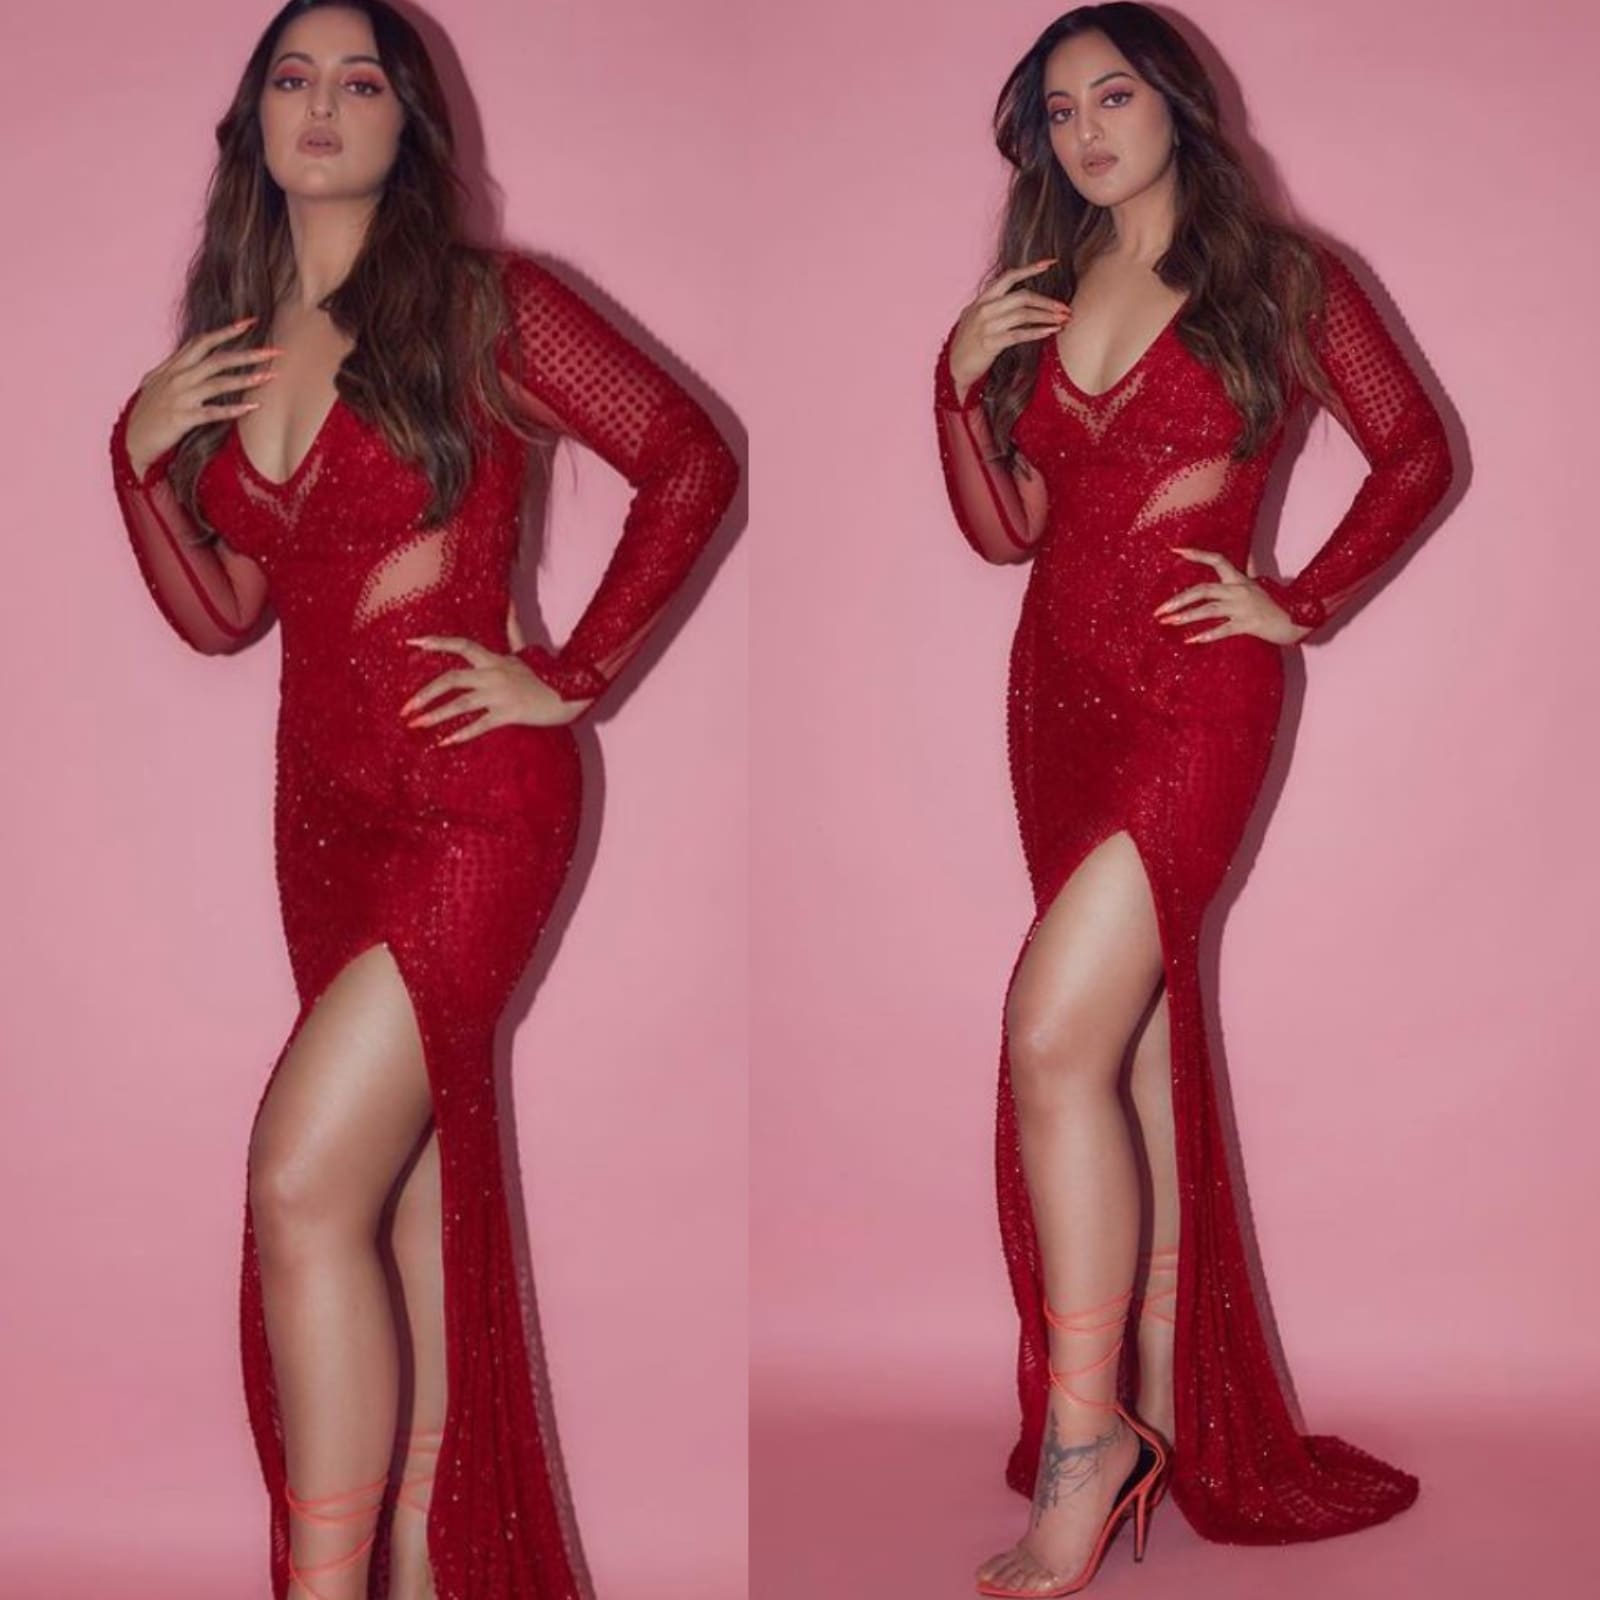 Sonaxi Sinha Nude Bathing - Sonakshi Sinha Raises The Glam Quotient In A Red Thigh-High Slit Dress -  News18